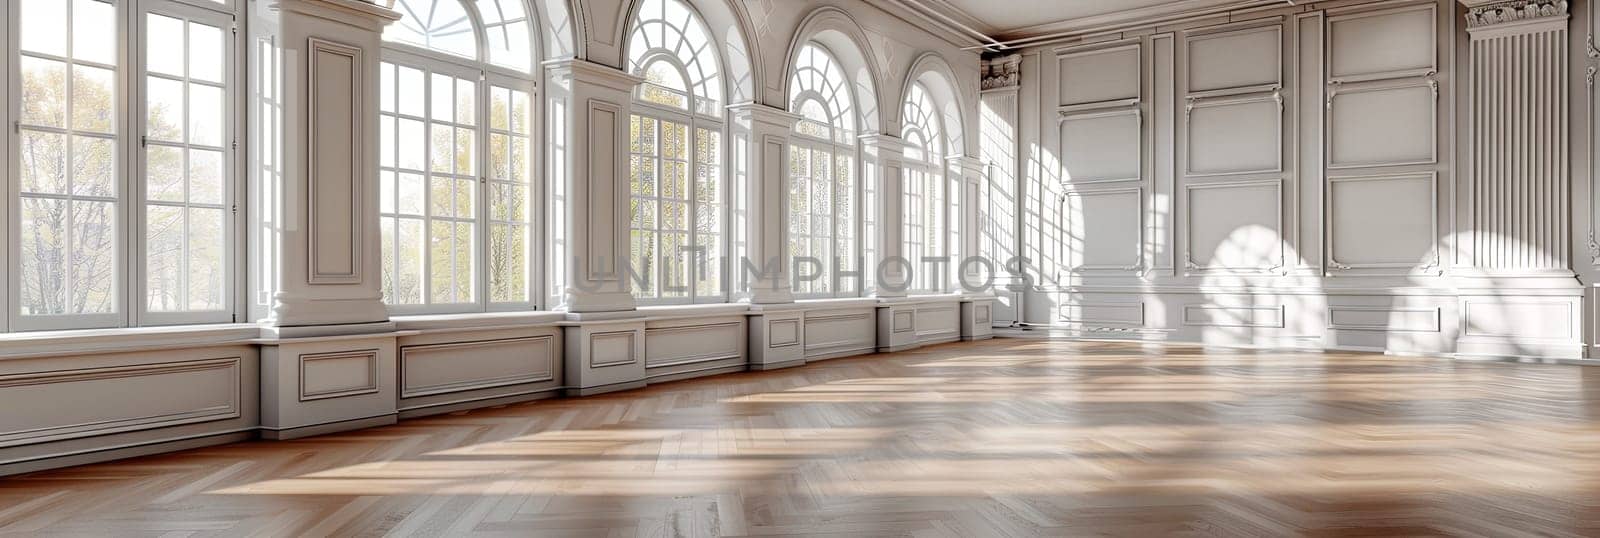 Vintage-style empty banquet hall with a parquet floor and large windows.